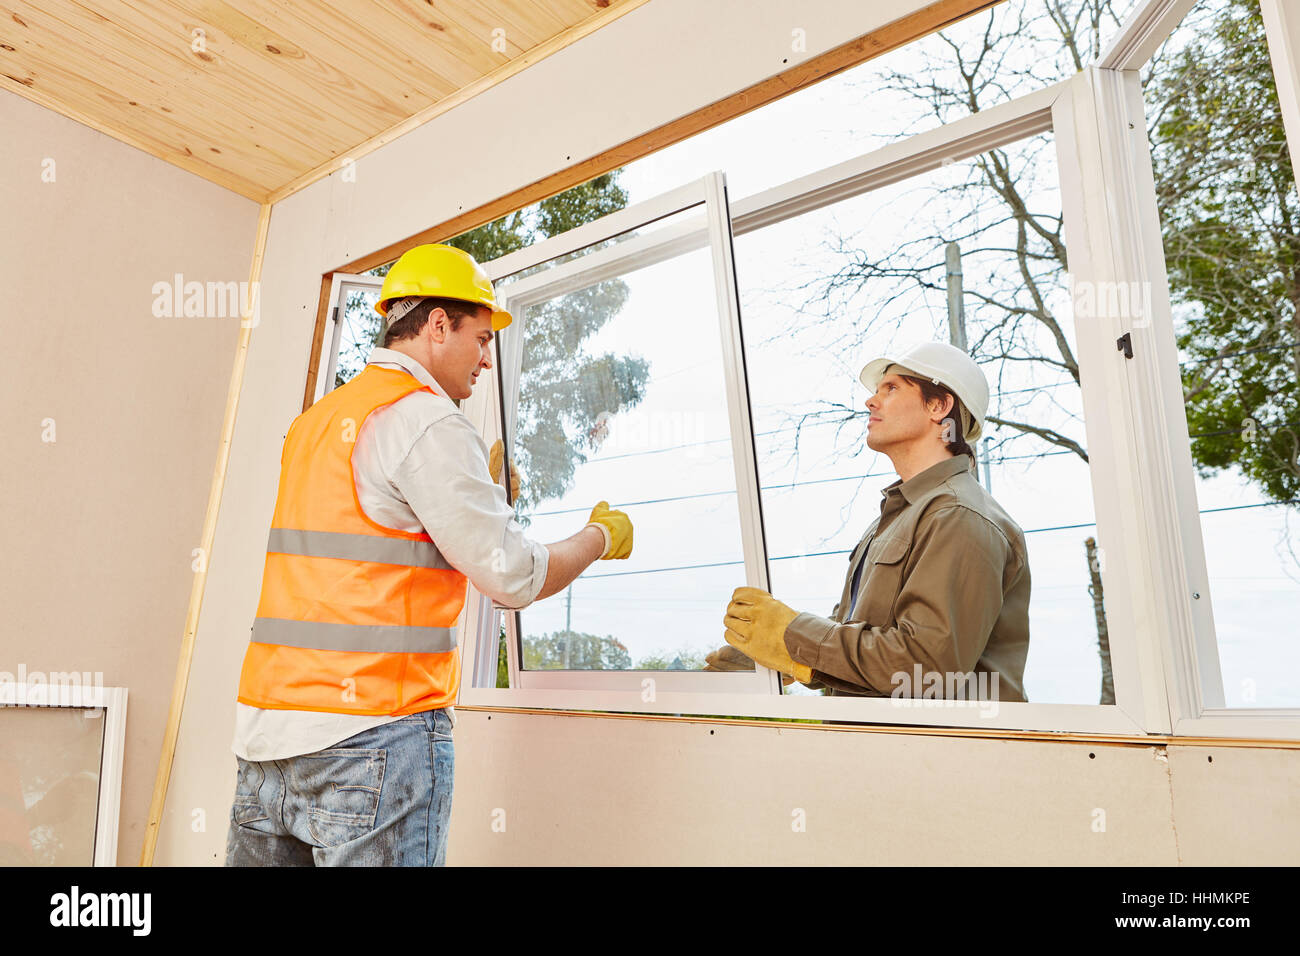 Mechanichs assembling window mount at woodhouse in construction Stock Photo